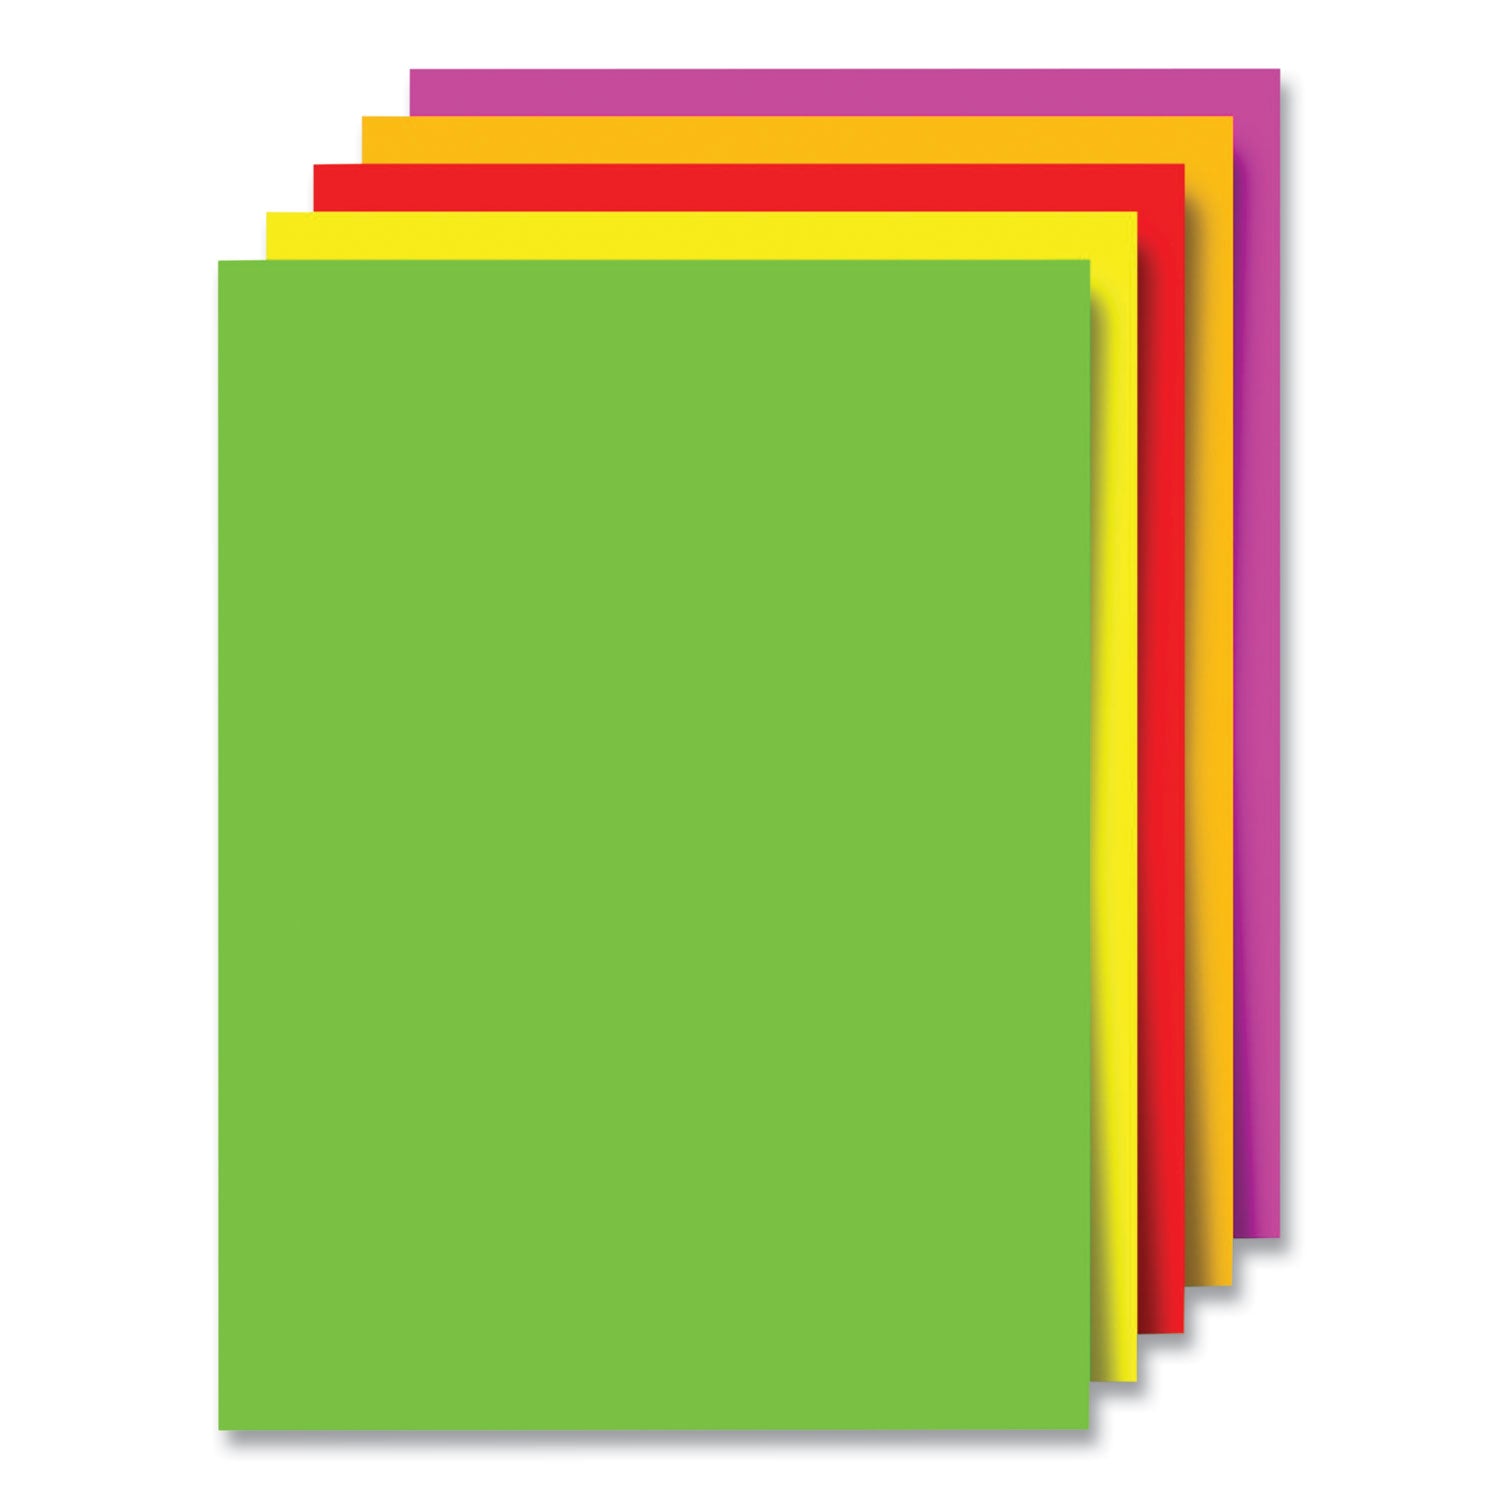 premium-coated-poster-board-11-x-14-assorted-neon-colors-5-pack_geo23500s - 1